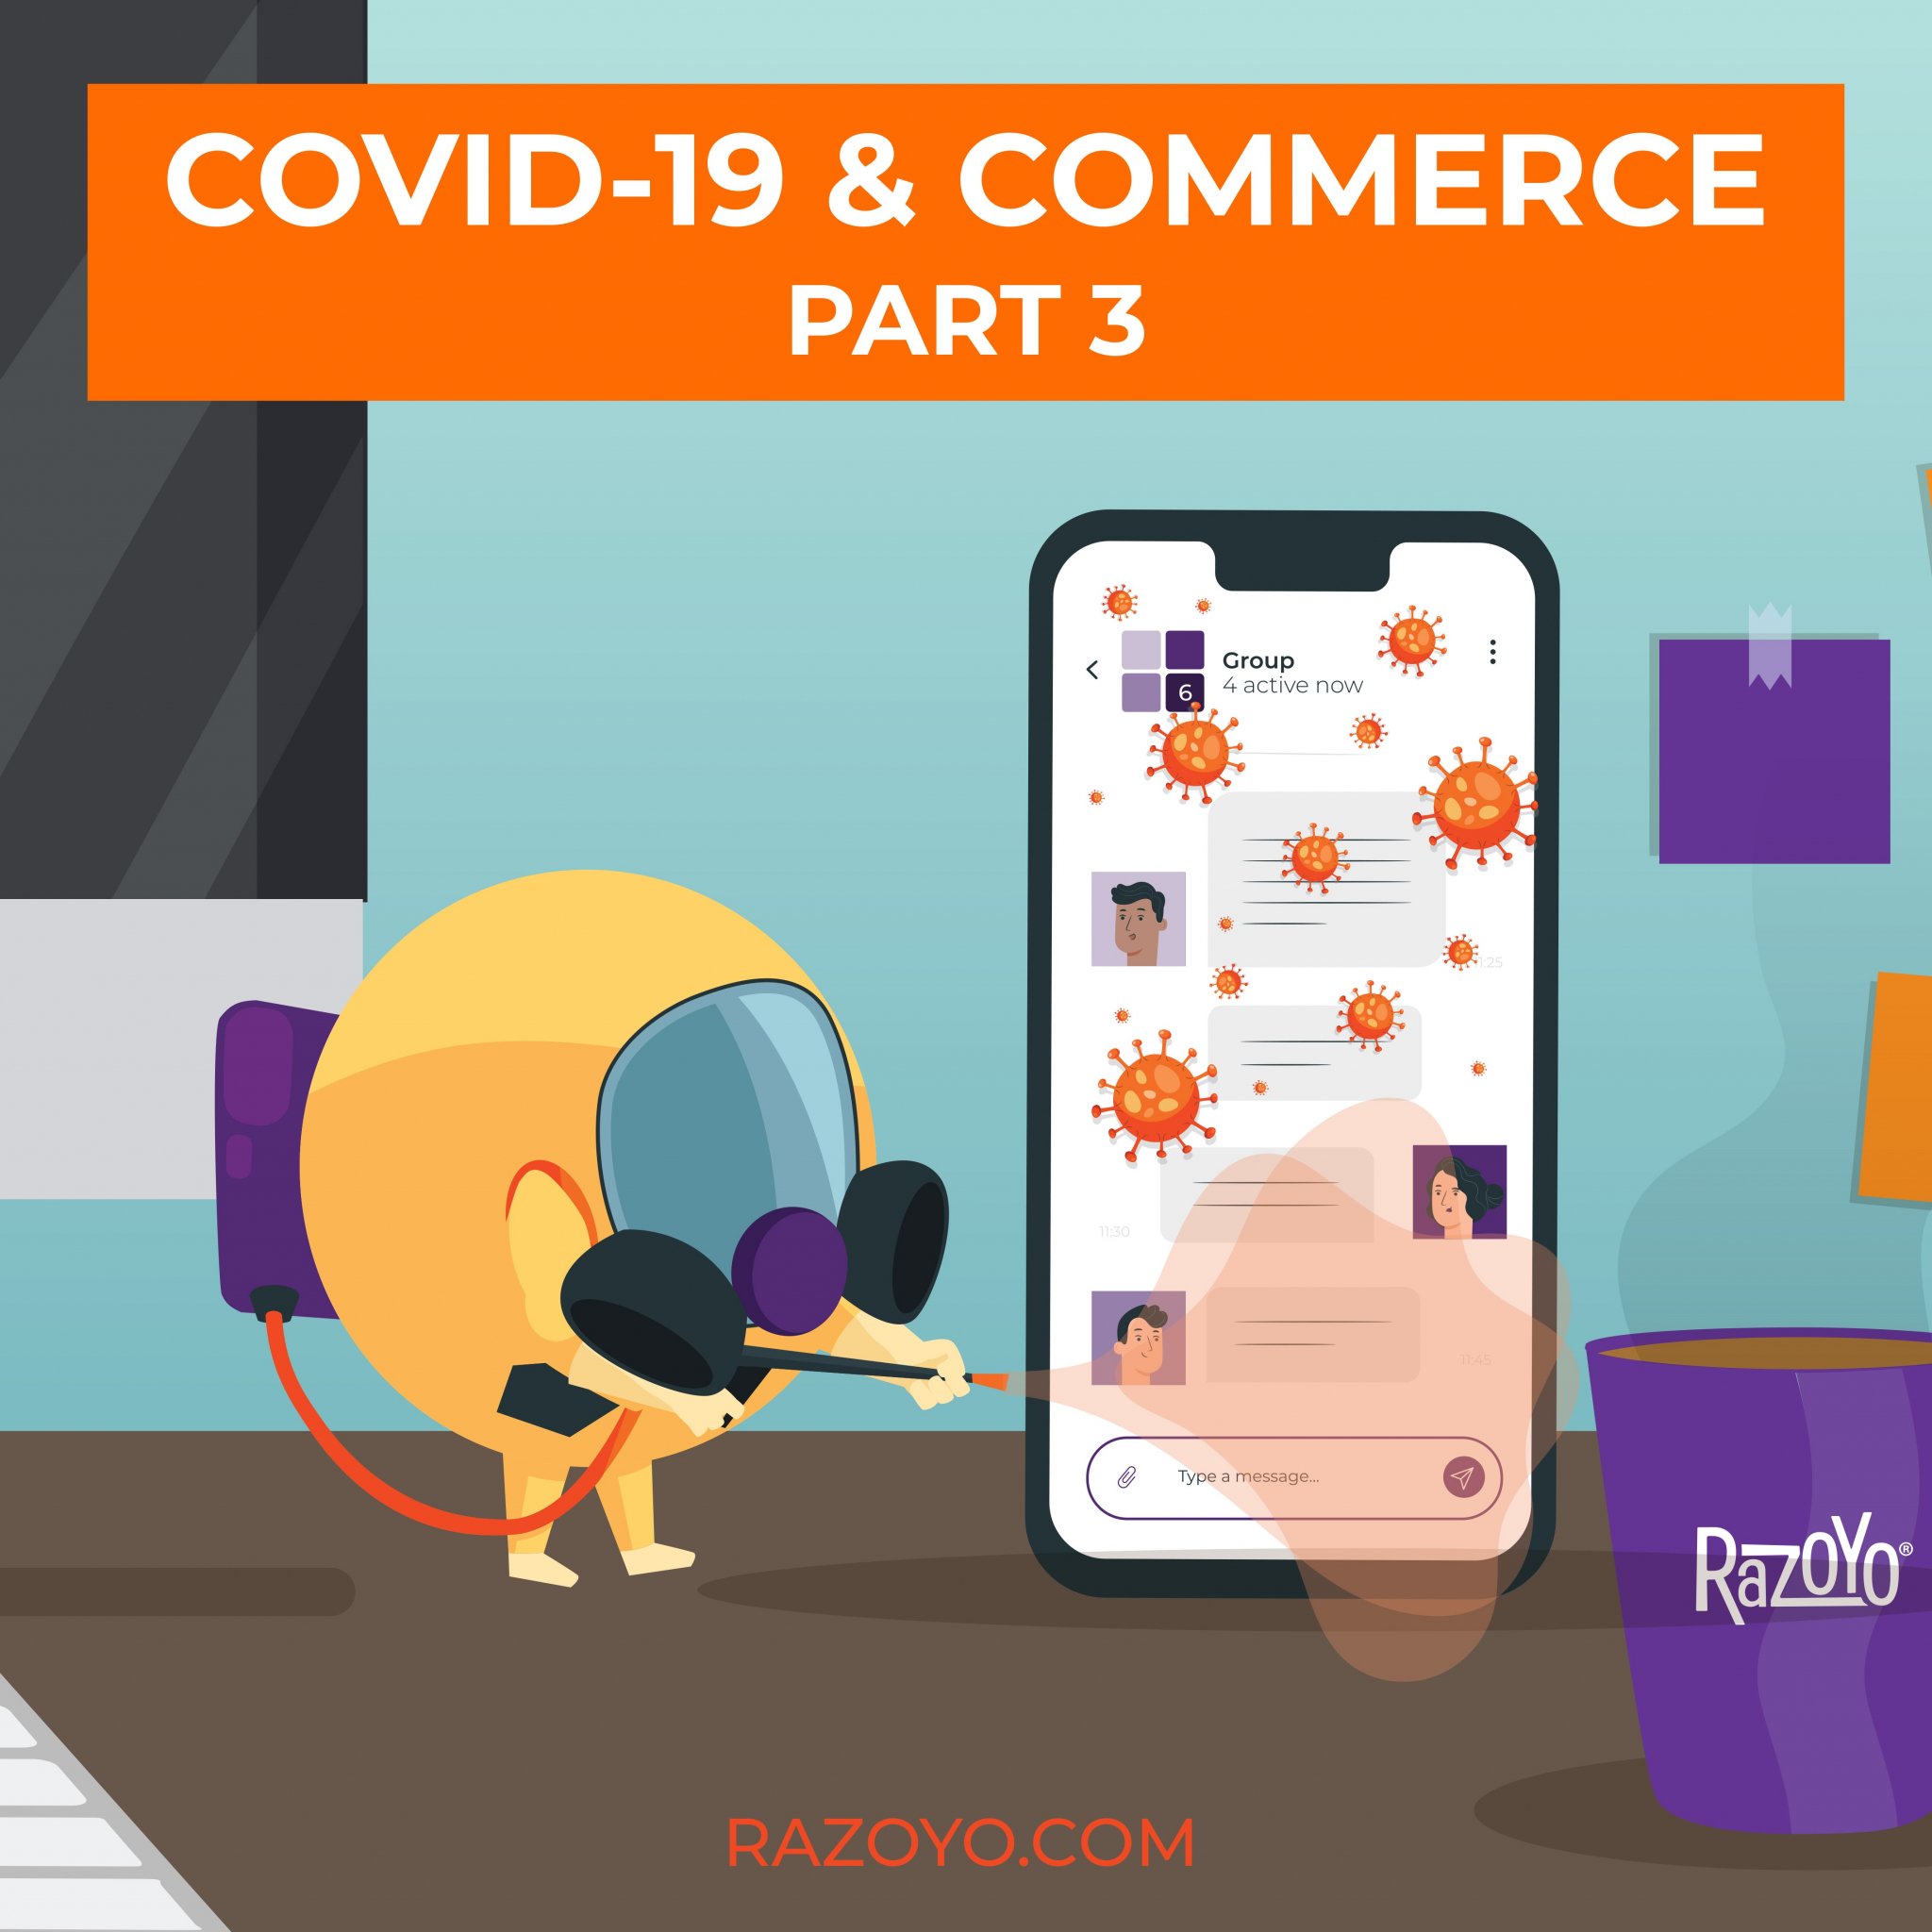 Part 3: how the ecommerce community can be heros in the Corona Virus crisis